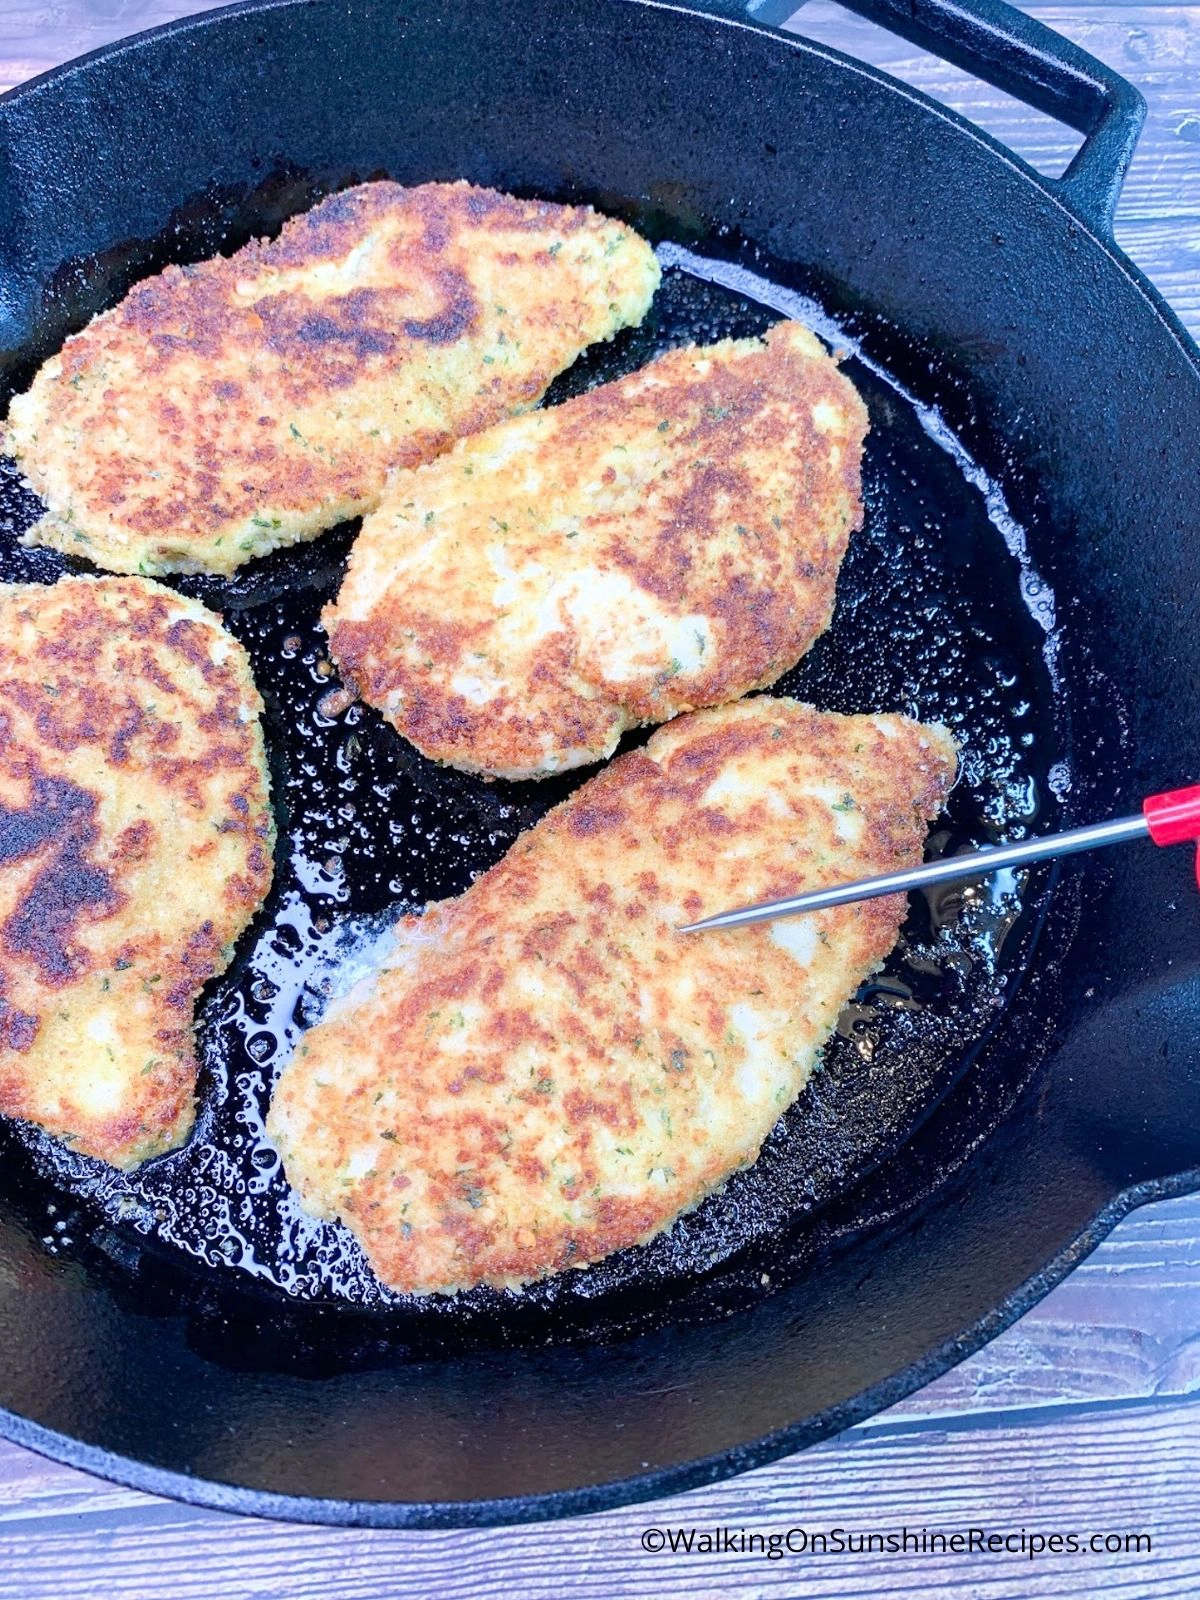 Test chicken cutlets with instant read thermometer to ensure internal temperature at 165.